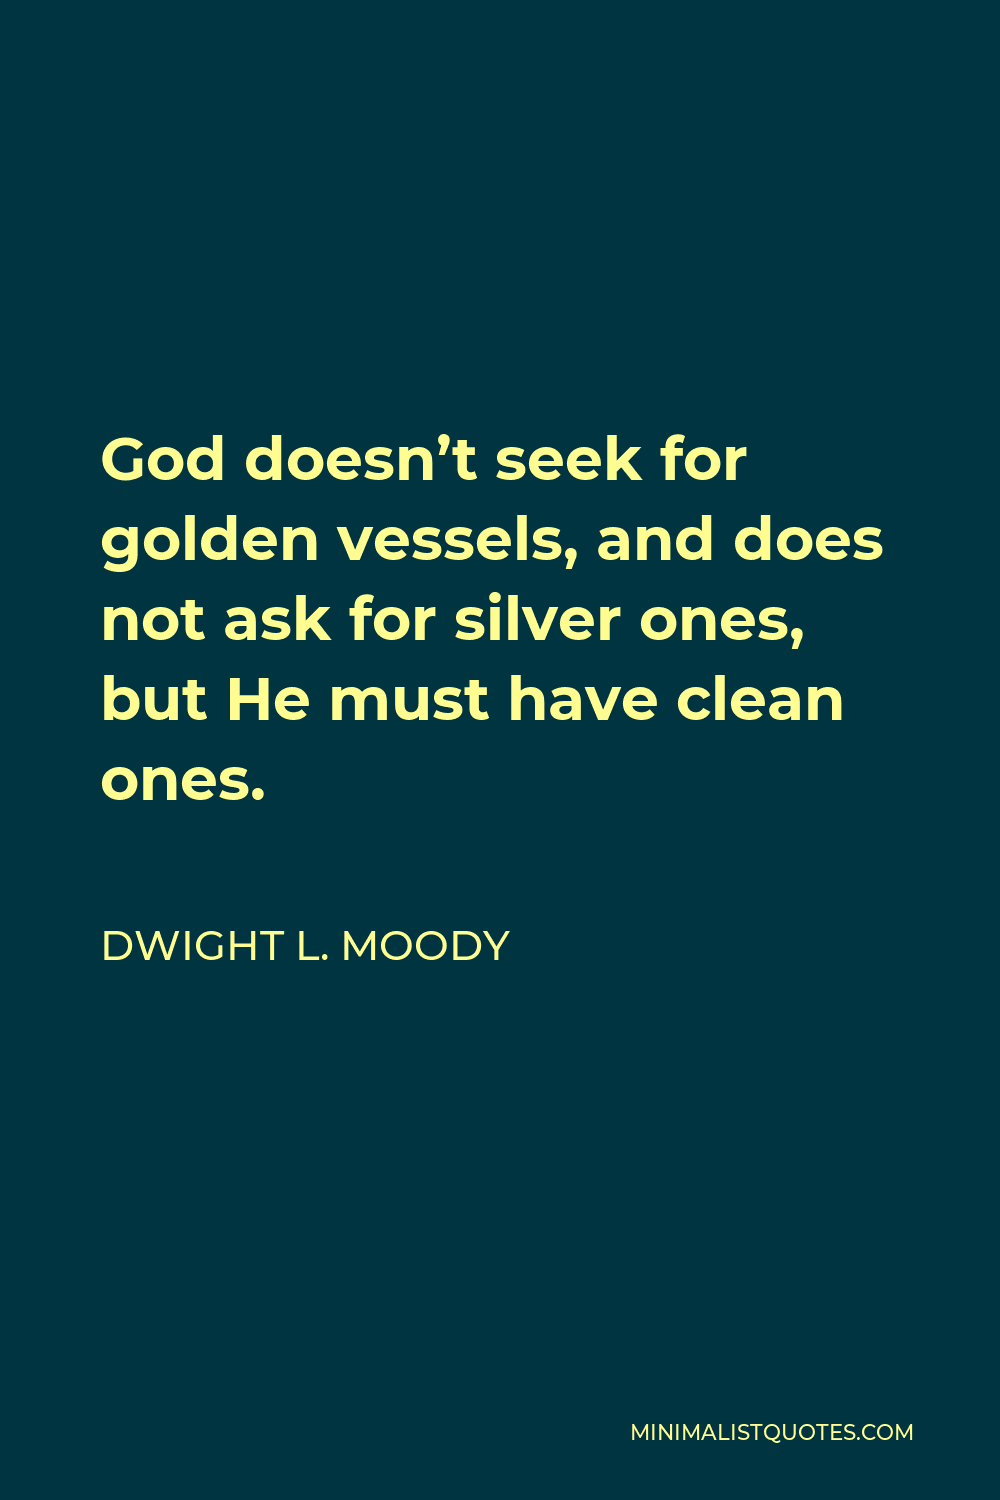 Dwight L. Moody Quote - God doesn’t seek for golden vessels, and does not ask for silver ones, but He must have clean ones.